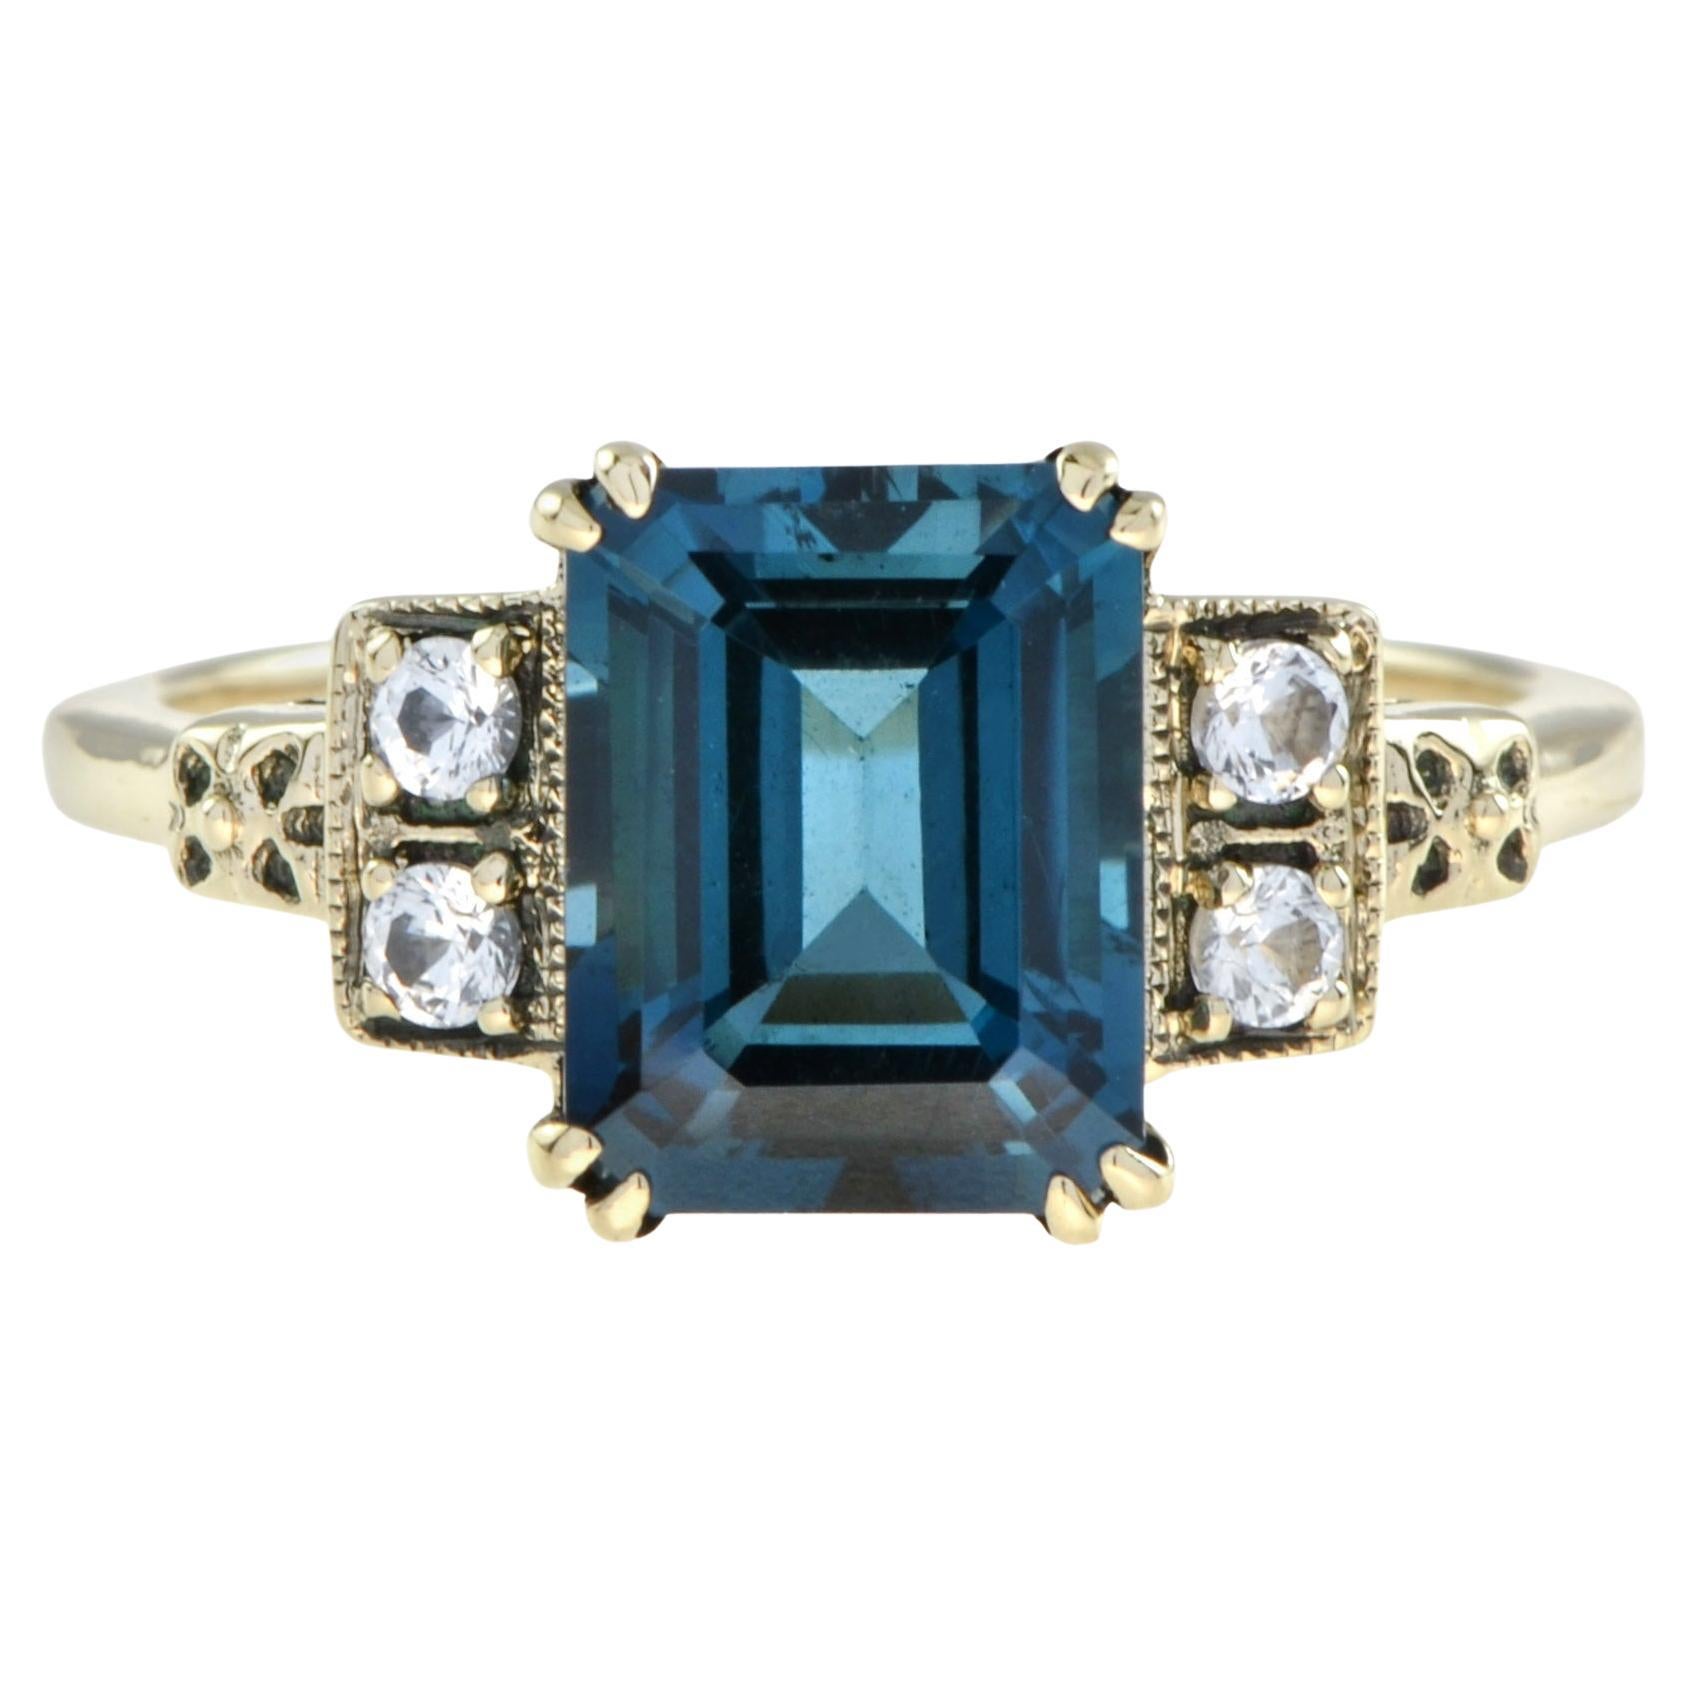 Marin Emerald Cut London Blue and White Sapphire Engagement Ring in 9K Gold